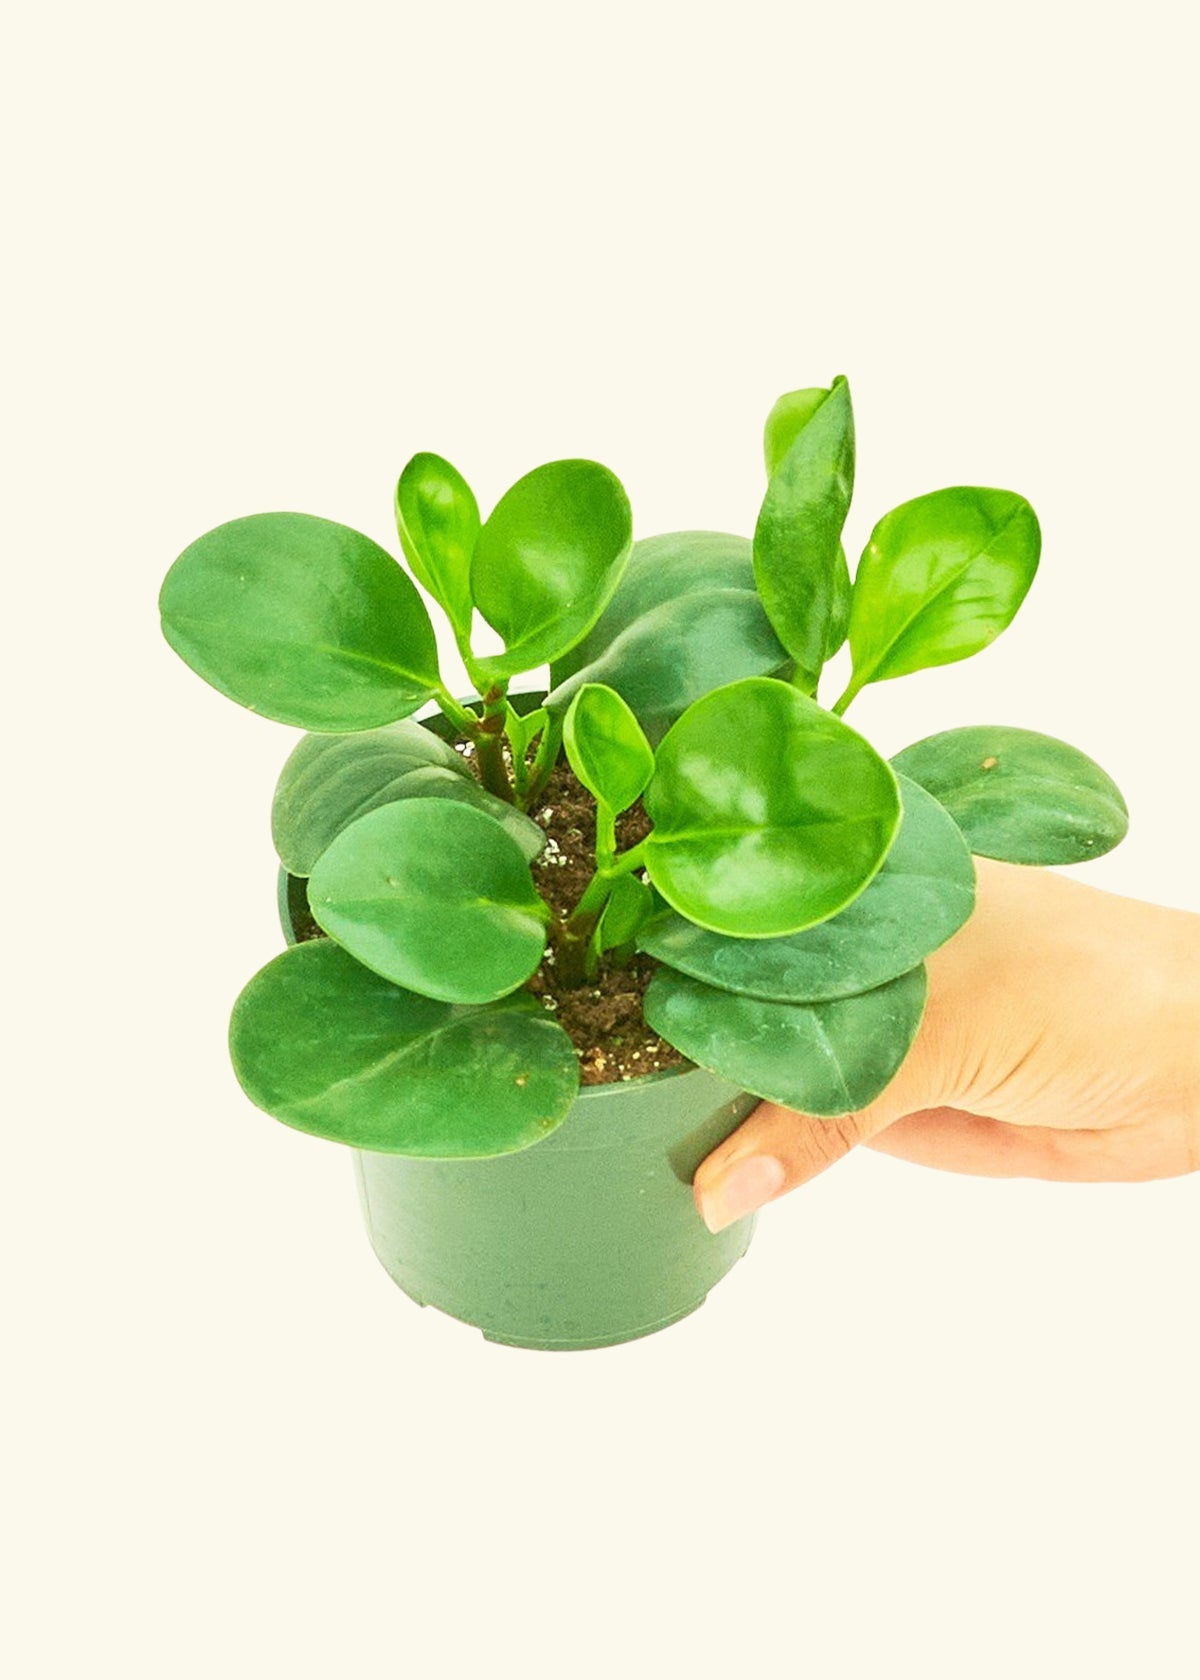 Peperomia Obtusifolia Low Light Plants Houseplants Delivery, 54% OFF